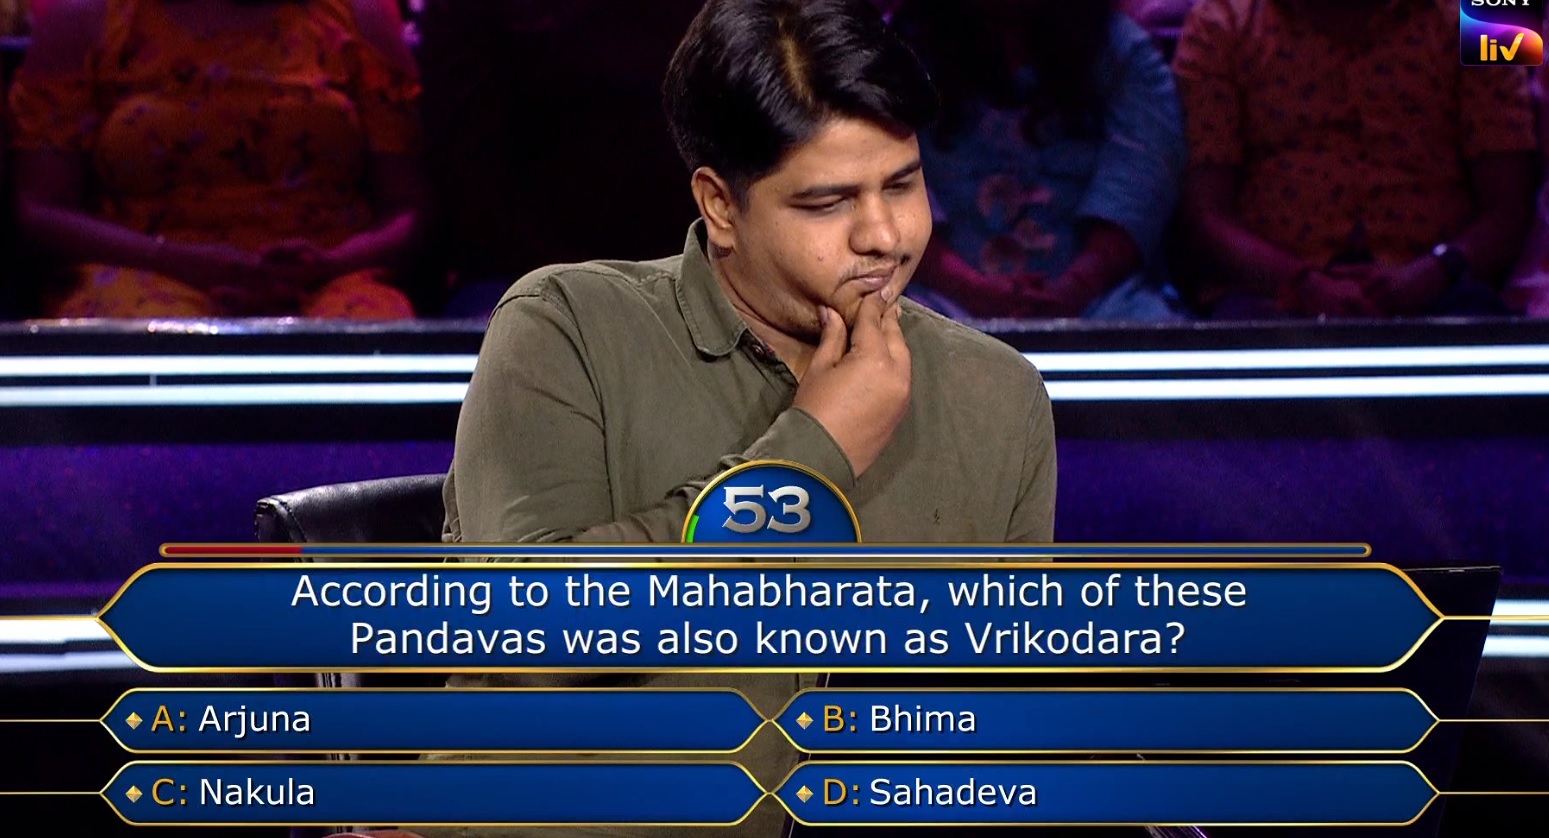 Ques : According to the Mahabharata, which of these Pandavas was also known as Vrikodara?